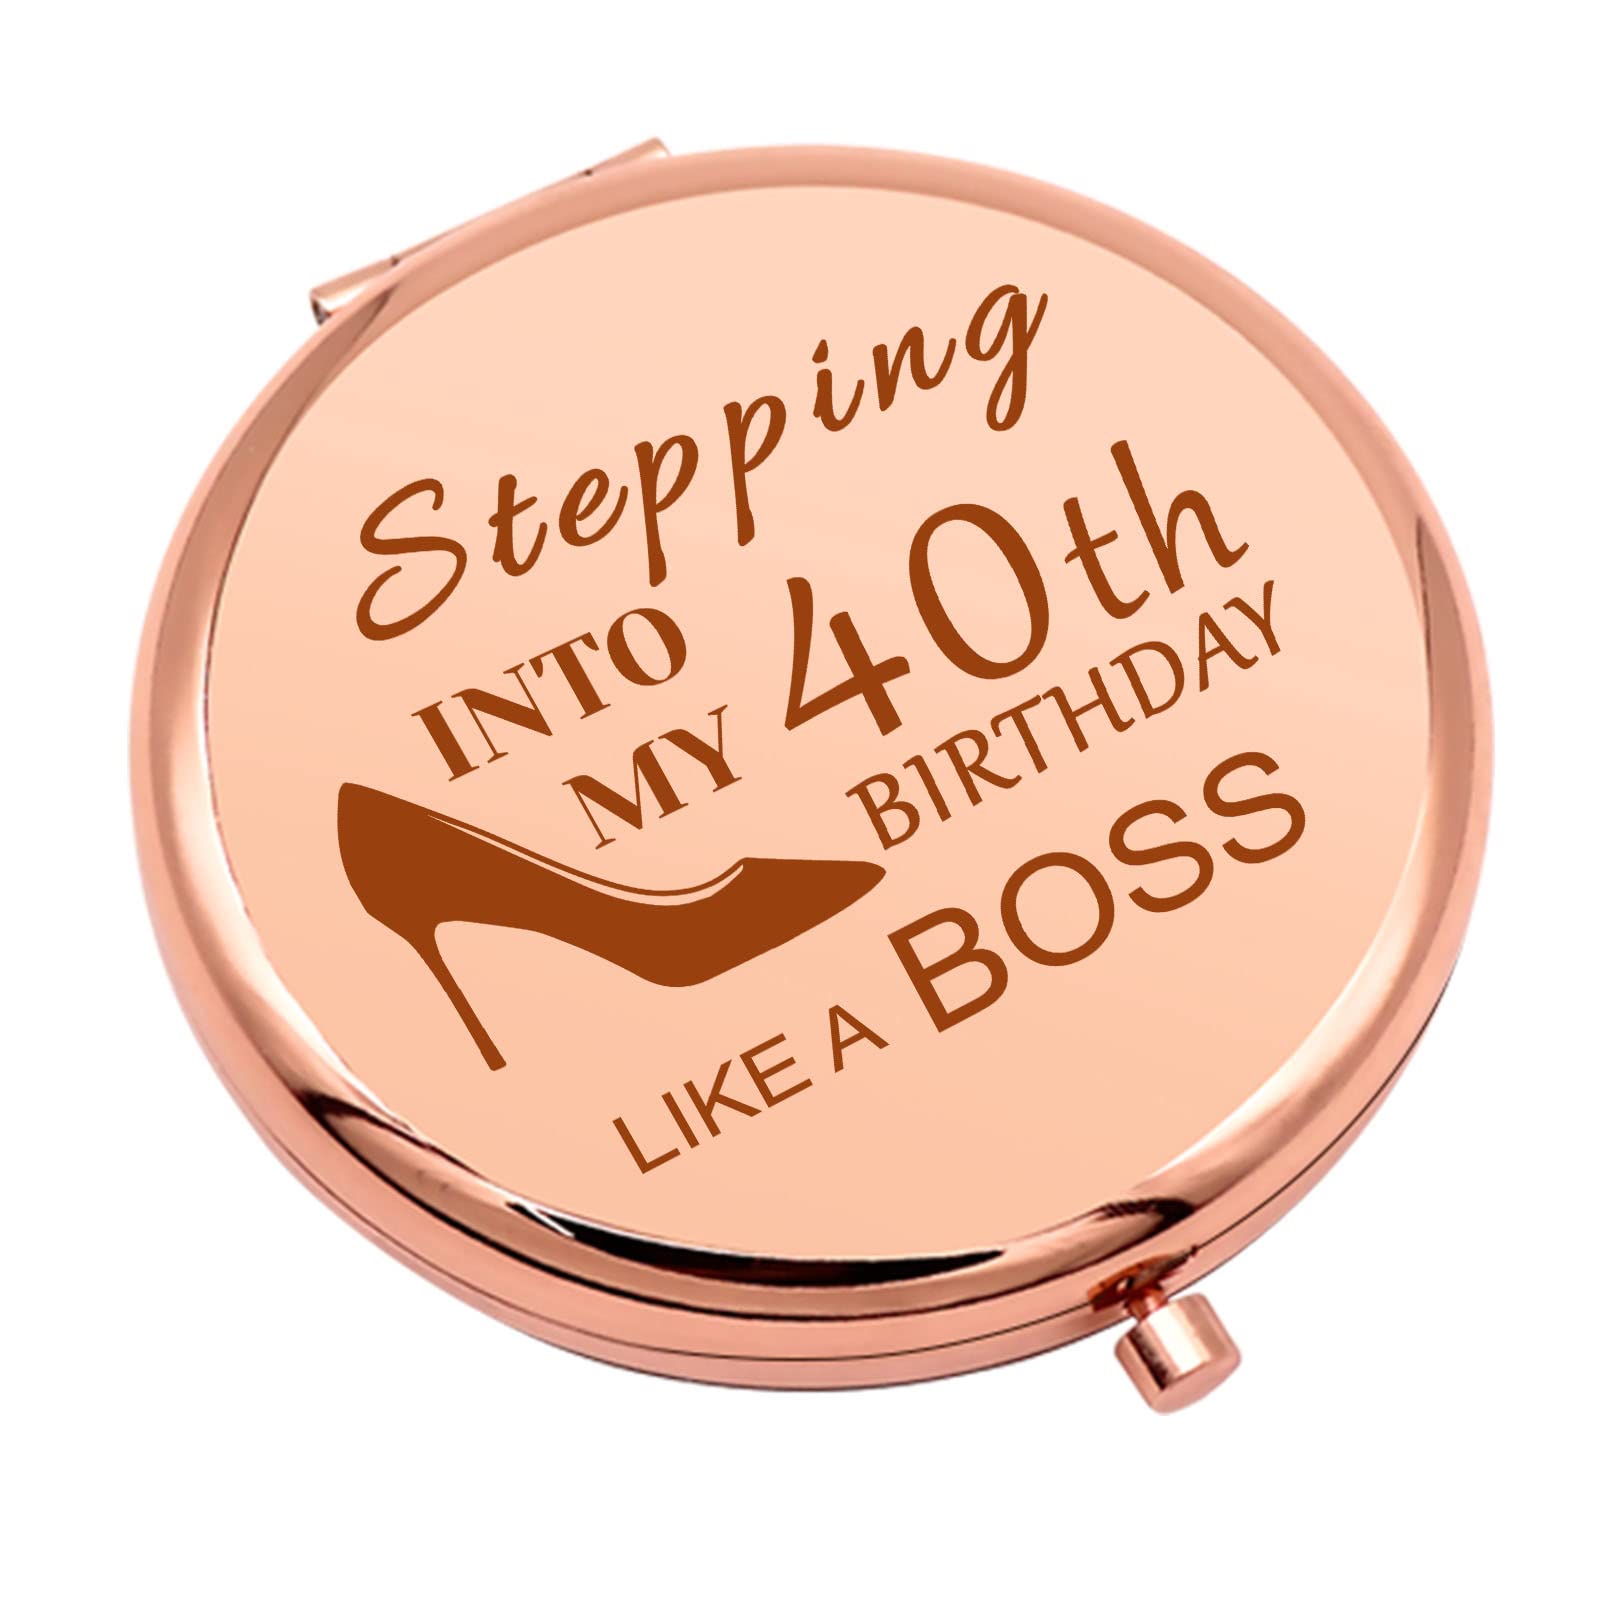 40th Birthday Gifts for Women 40 Years Old Birthday Gifts for Women Compact  Mirror for Wife Mom Friend Turning 40 Gifts for Women Folding Makeup Mirror  for Colleague Coworker